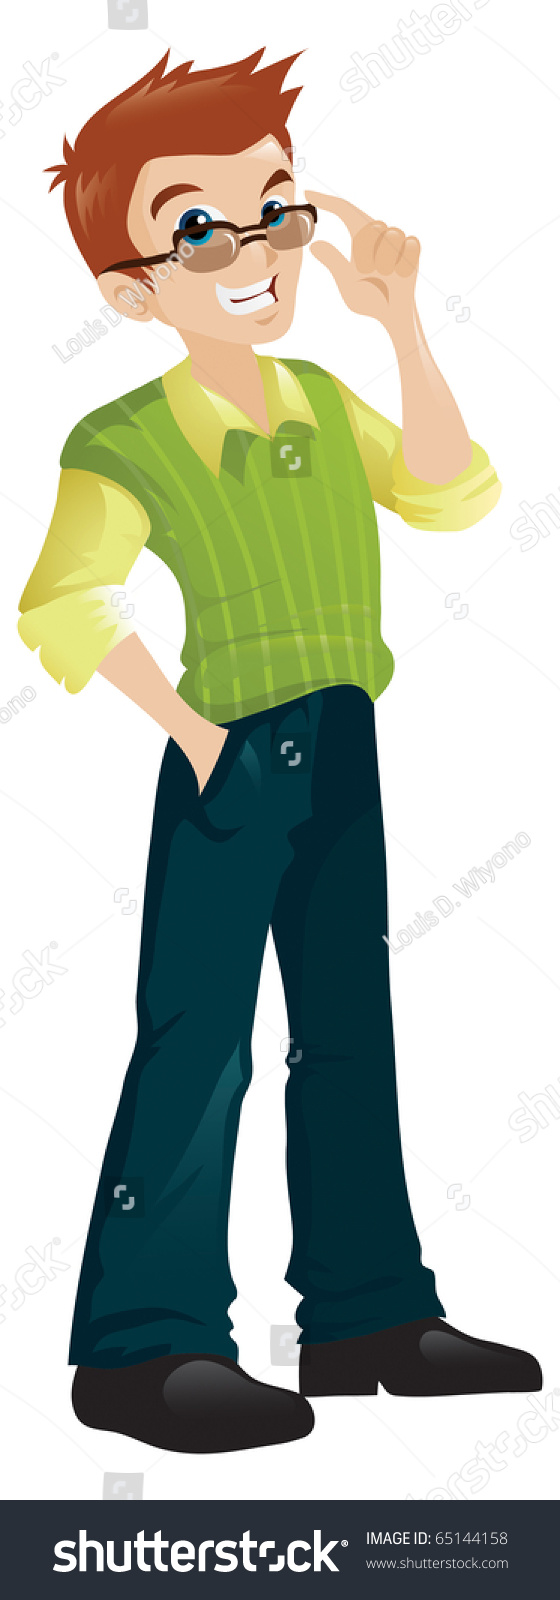 A Cartoon Character Of An Attractive Young Man Stock Vector